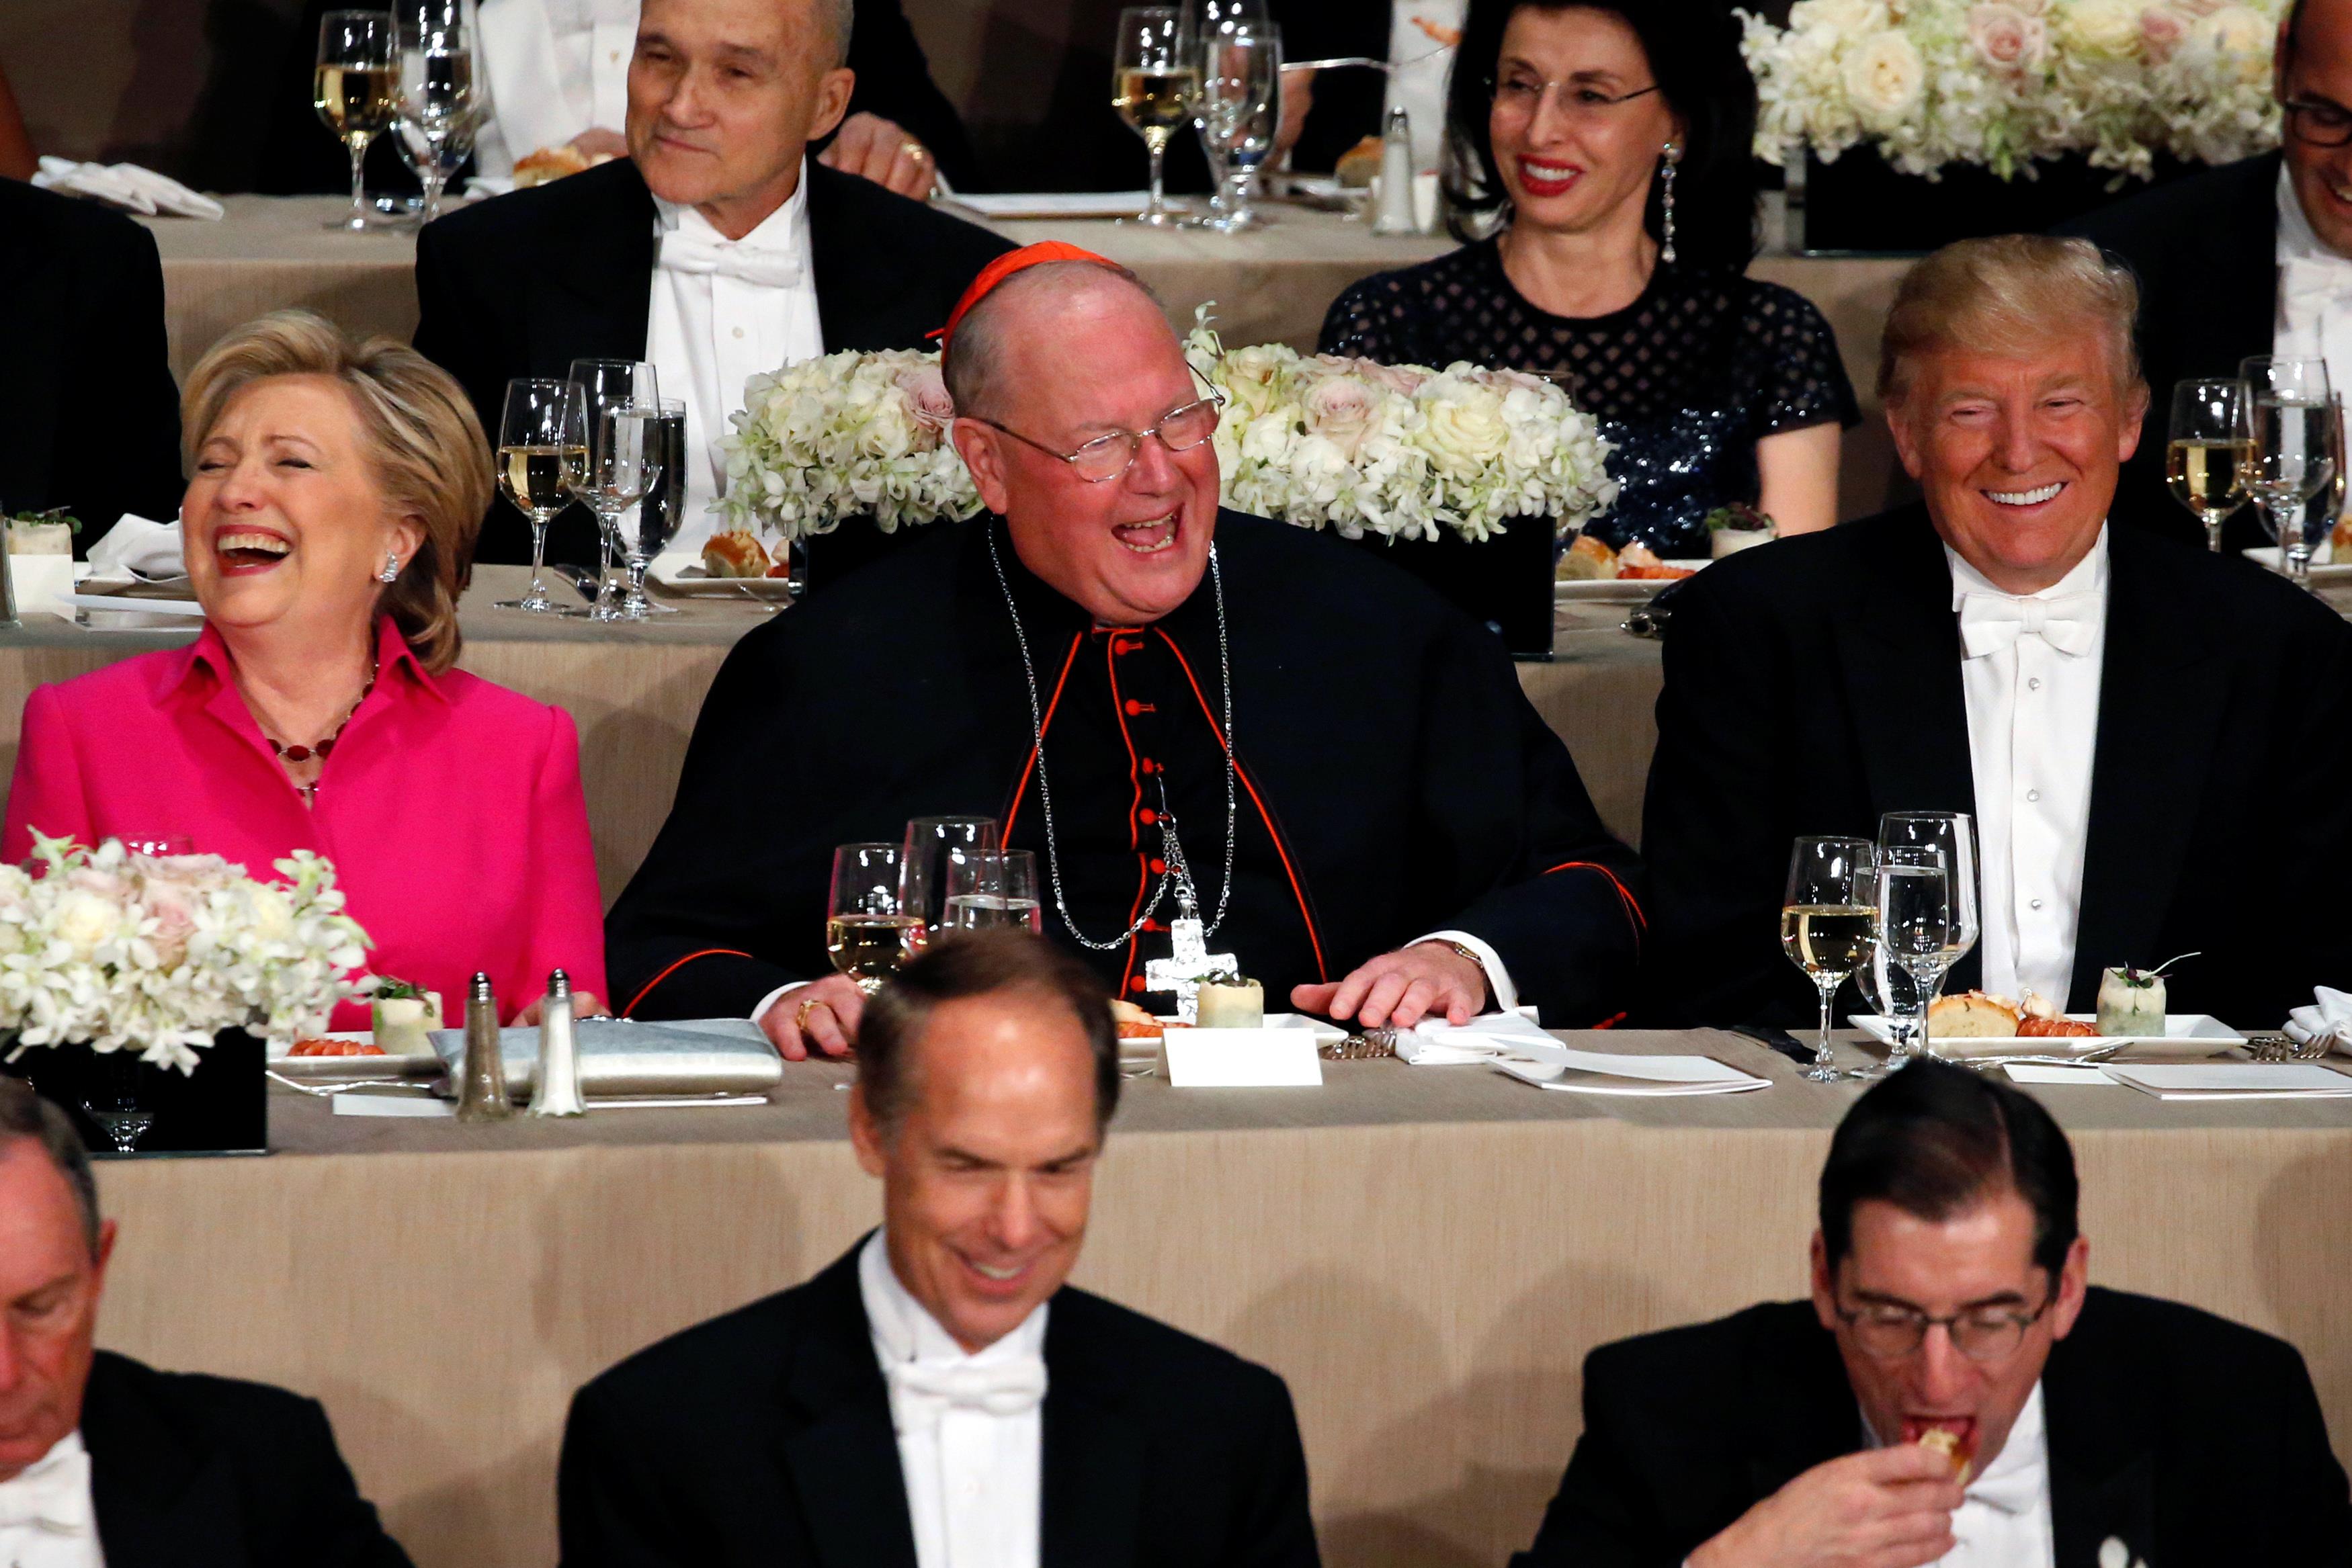 Clinton, Dolan and Trump sit together at the Alfred E. Smith Memorial Foundation dinner in New York